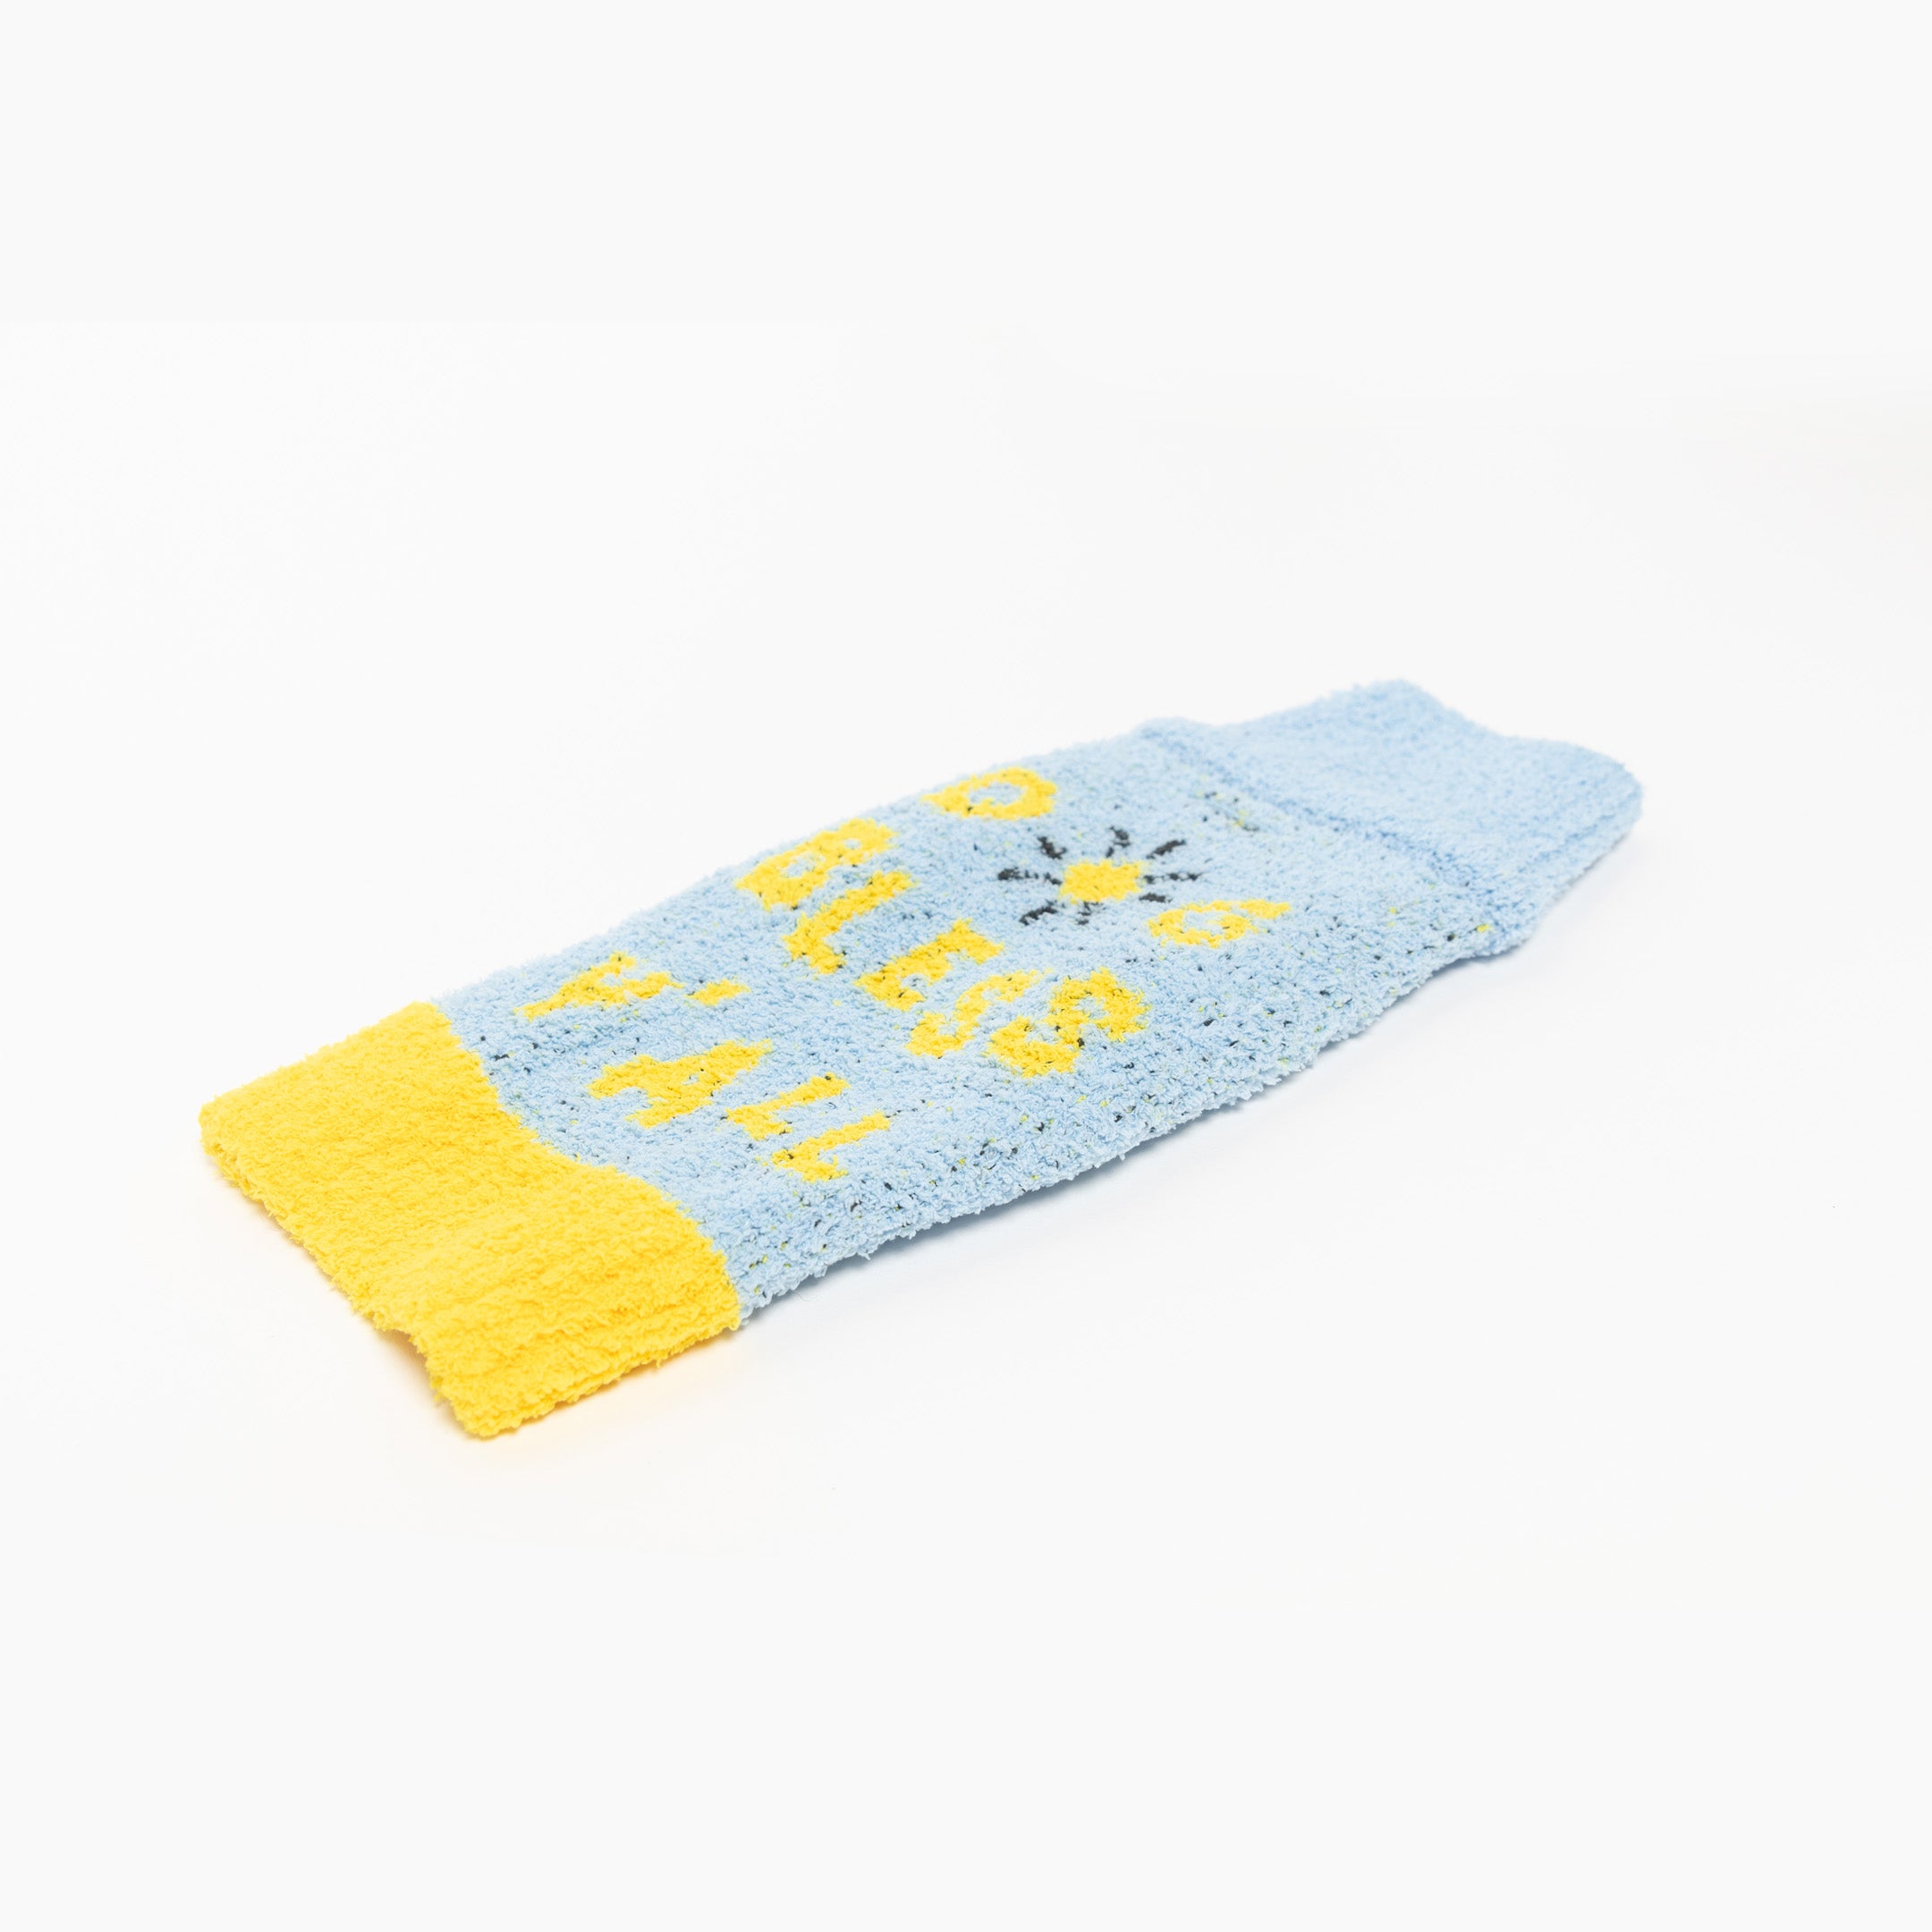  "The Furryfolks" light blue sweater with yellow trim and "DOG Bless Y'All" text displayed on a white background.